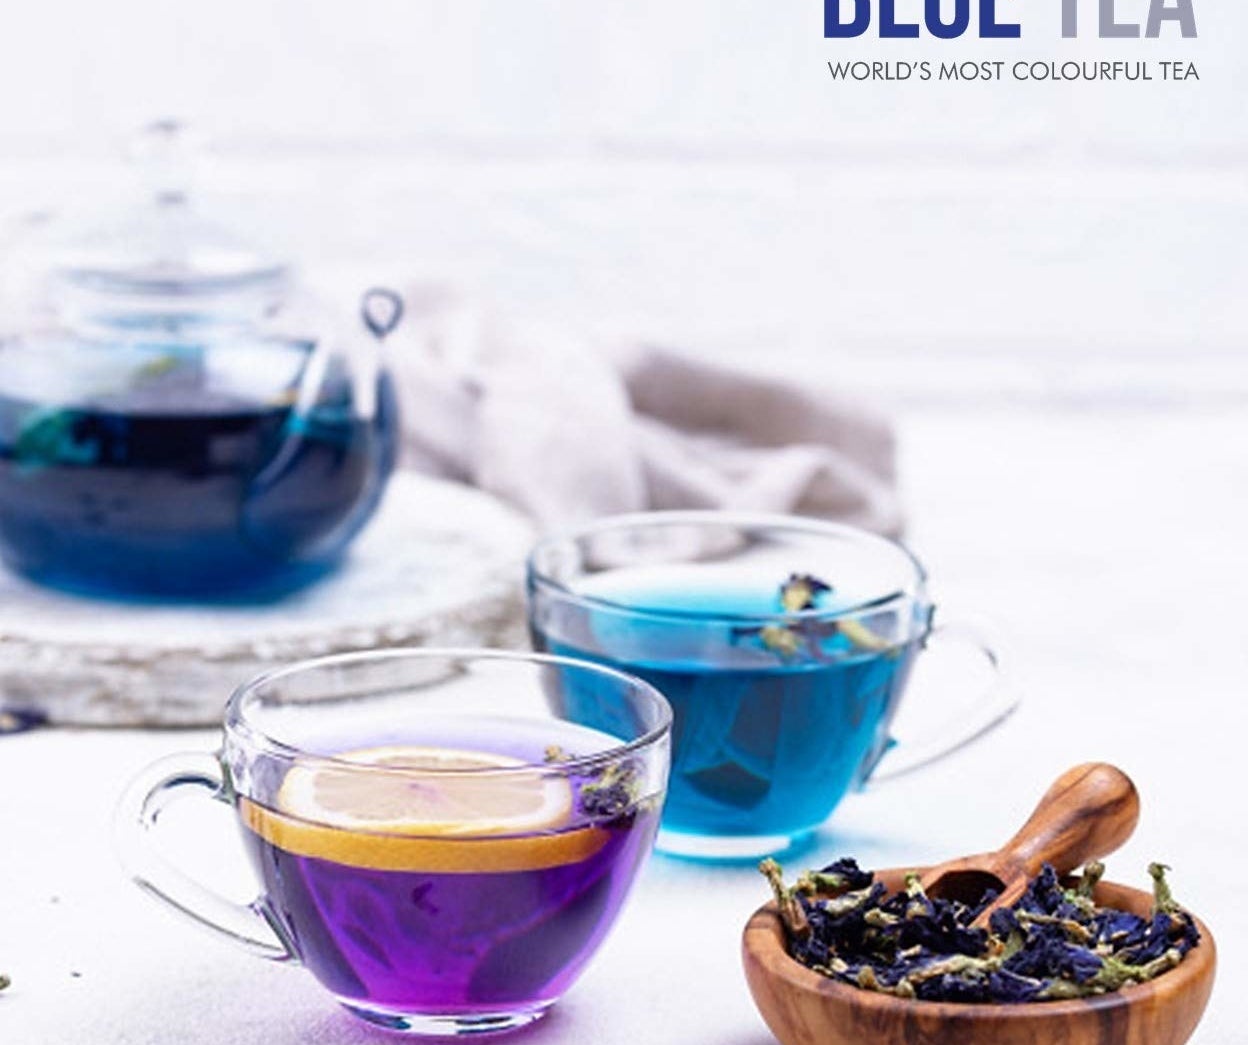 A transparent teacup with blue tea and one with lemon turning the tea purple.